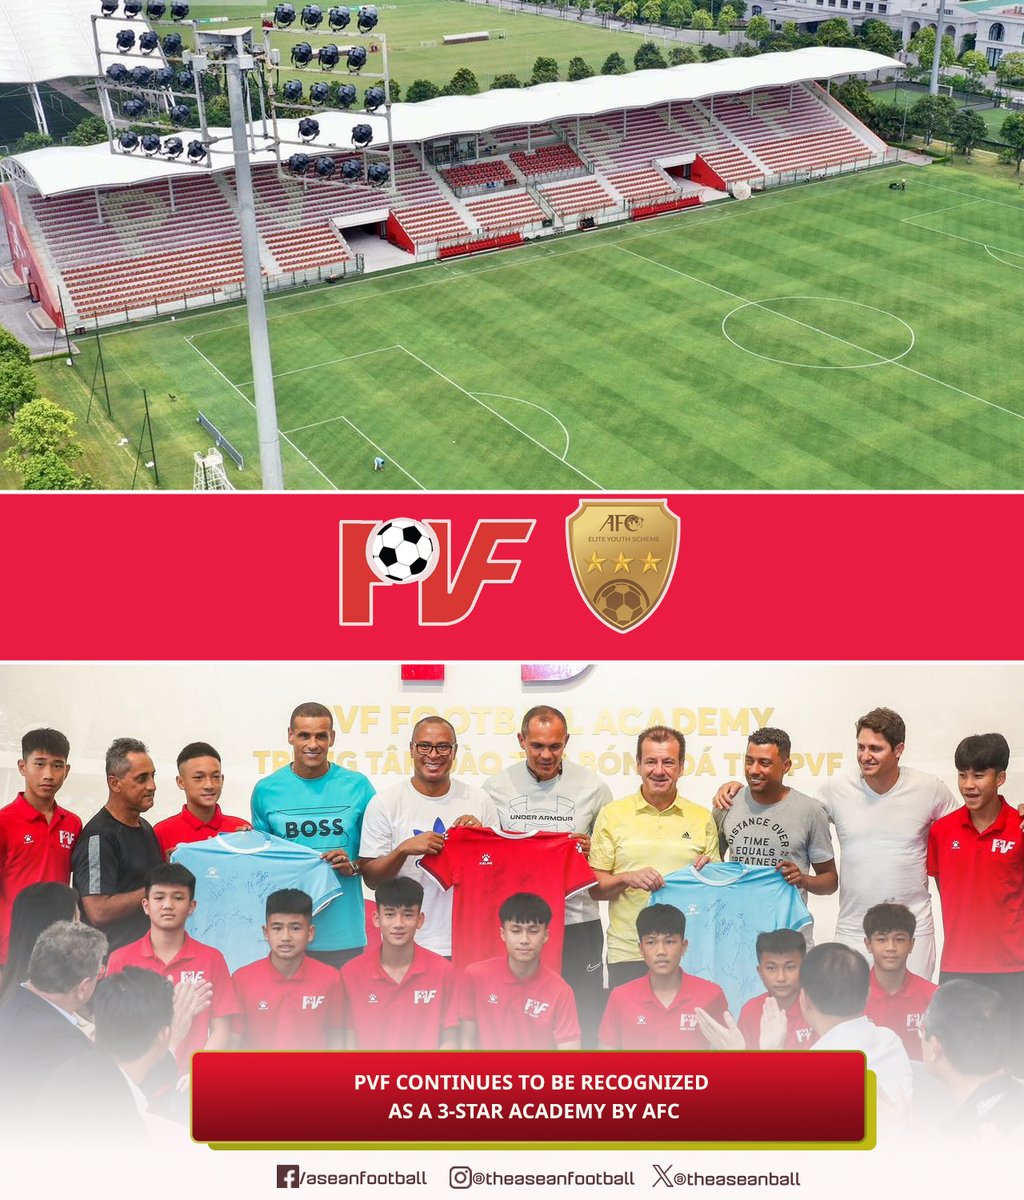 🌟 PVF Football Academy 🇻🇳 continues to be recognized by the Asian Football Confederation (AFC) as a 3-star academy under the AFC Elite Youth Scheme. This is the first and only academy in ASEAN to enjoy the status. #PVF #VFF